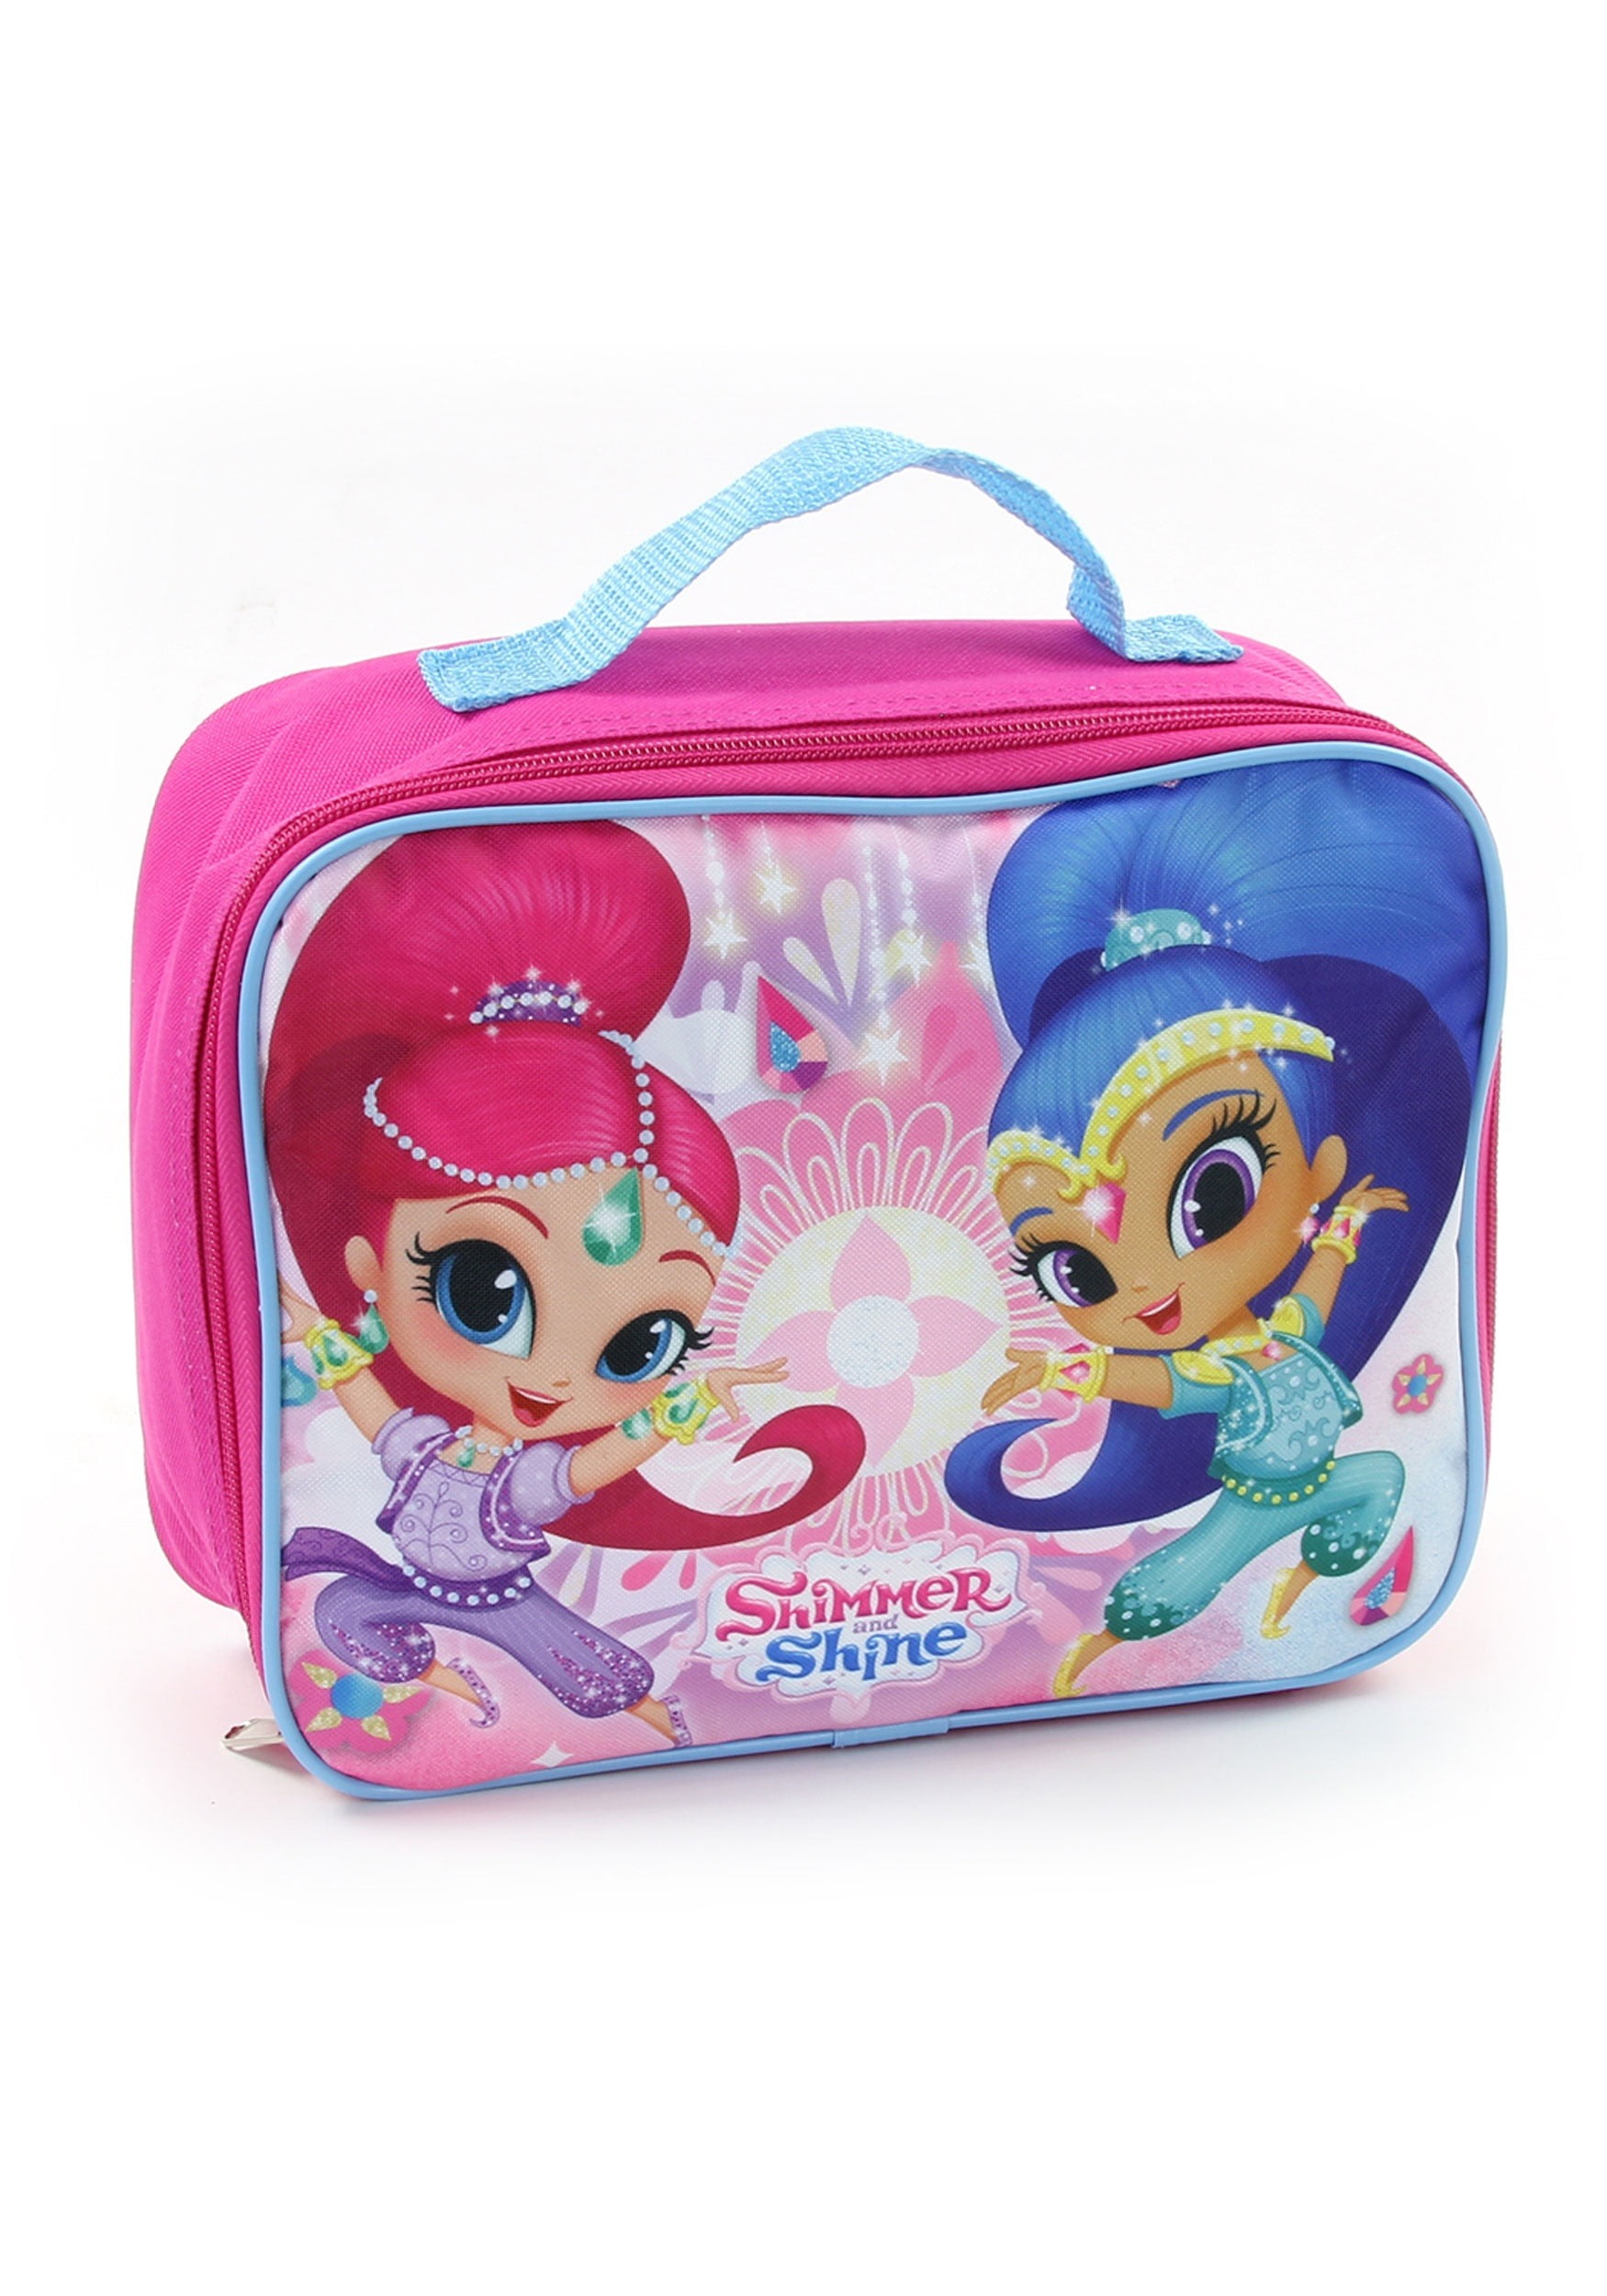 SHINE LARGE BACKPACK W INSULATED LUNCH BAG Kids Girls Travel School Bag Details about   SHIMMER 